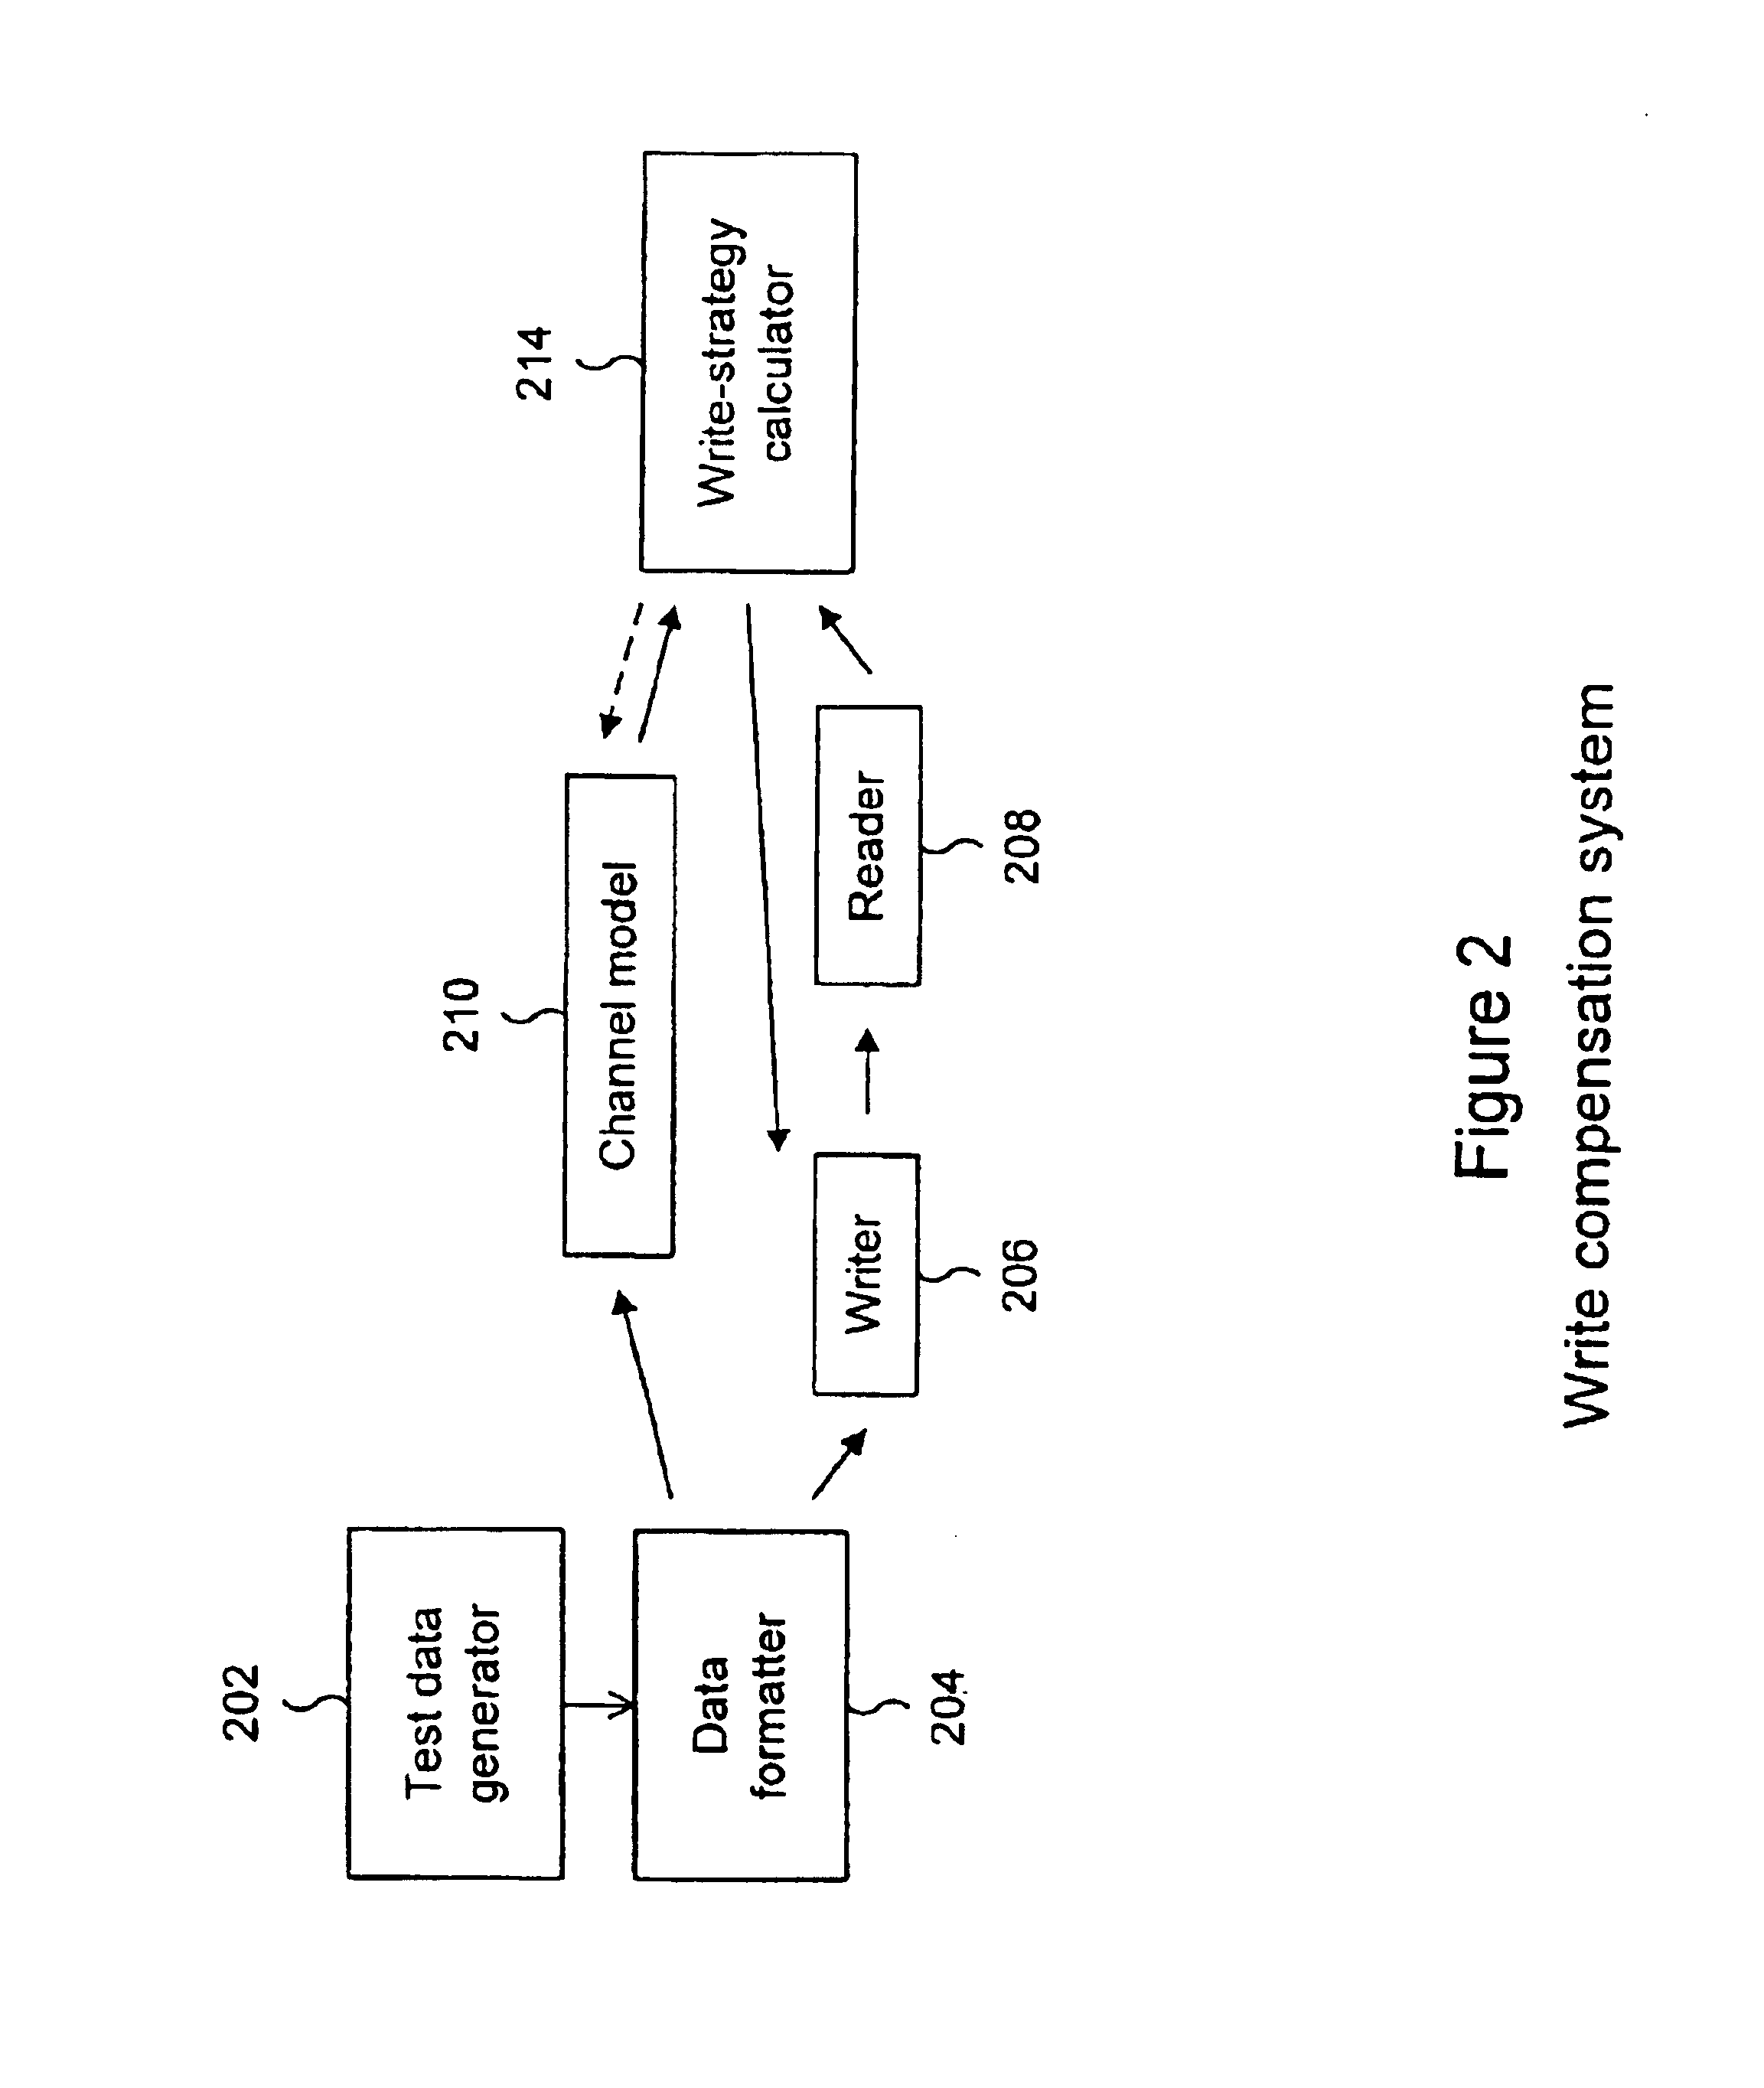 Write compensation for data storage and communication systems